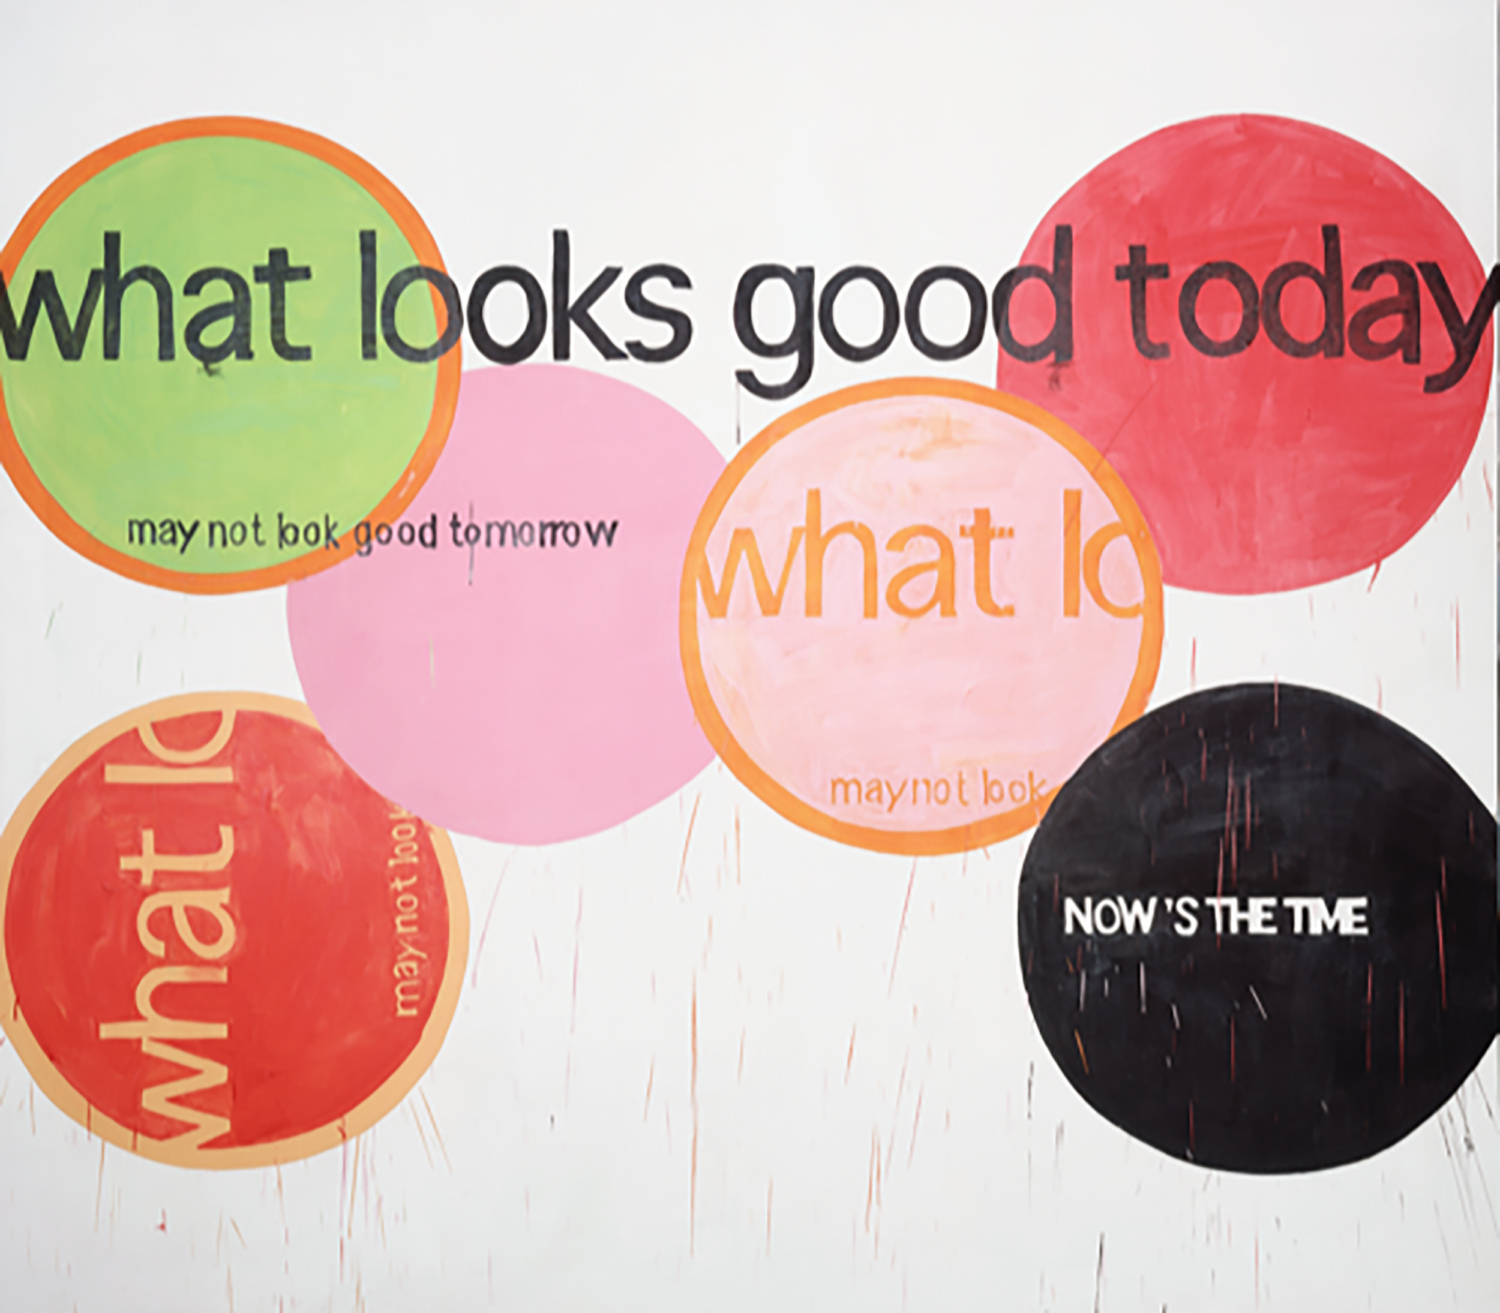 Michel Majerus, "what looks good today may not look good tomorrow", 2000 © Michel Majerus Estate, 2022. The Museum of Modern Art, New York. Gift of Mr. and Mrs. Werner E. Josten (by exchange). Photo: Jens Ziehe, Berlin